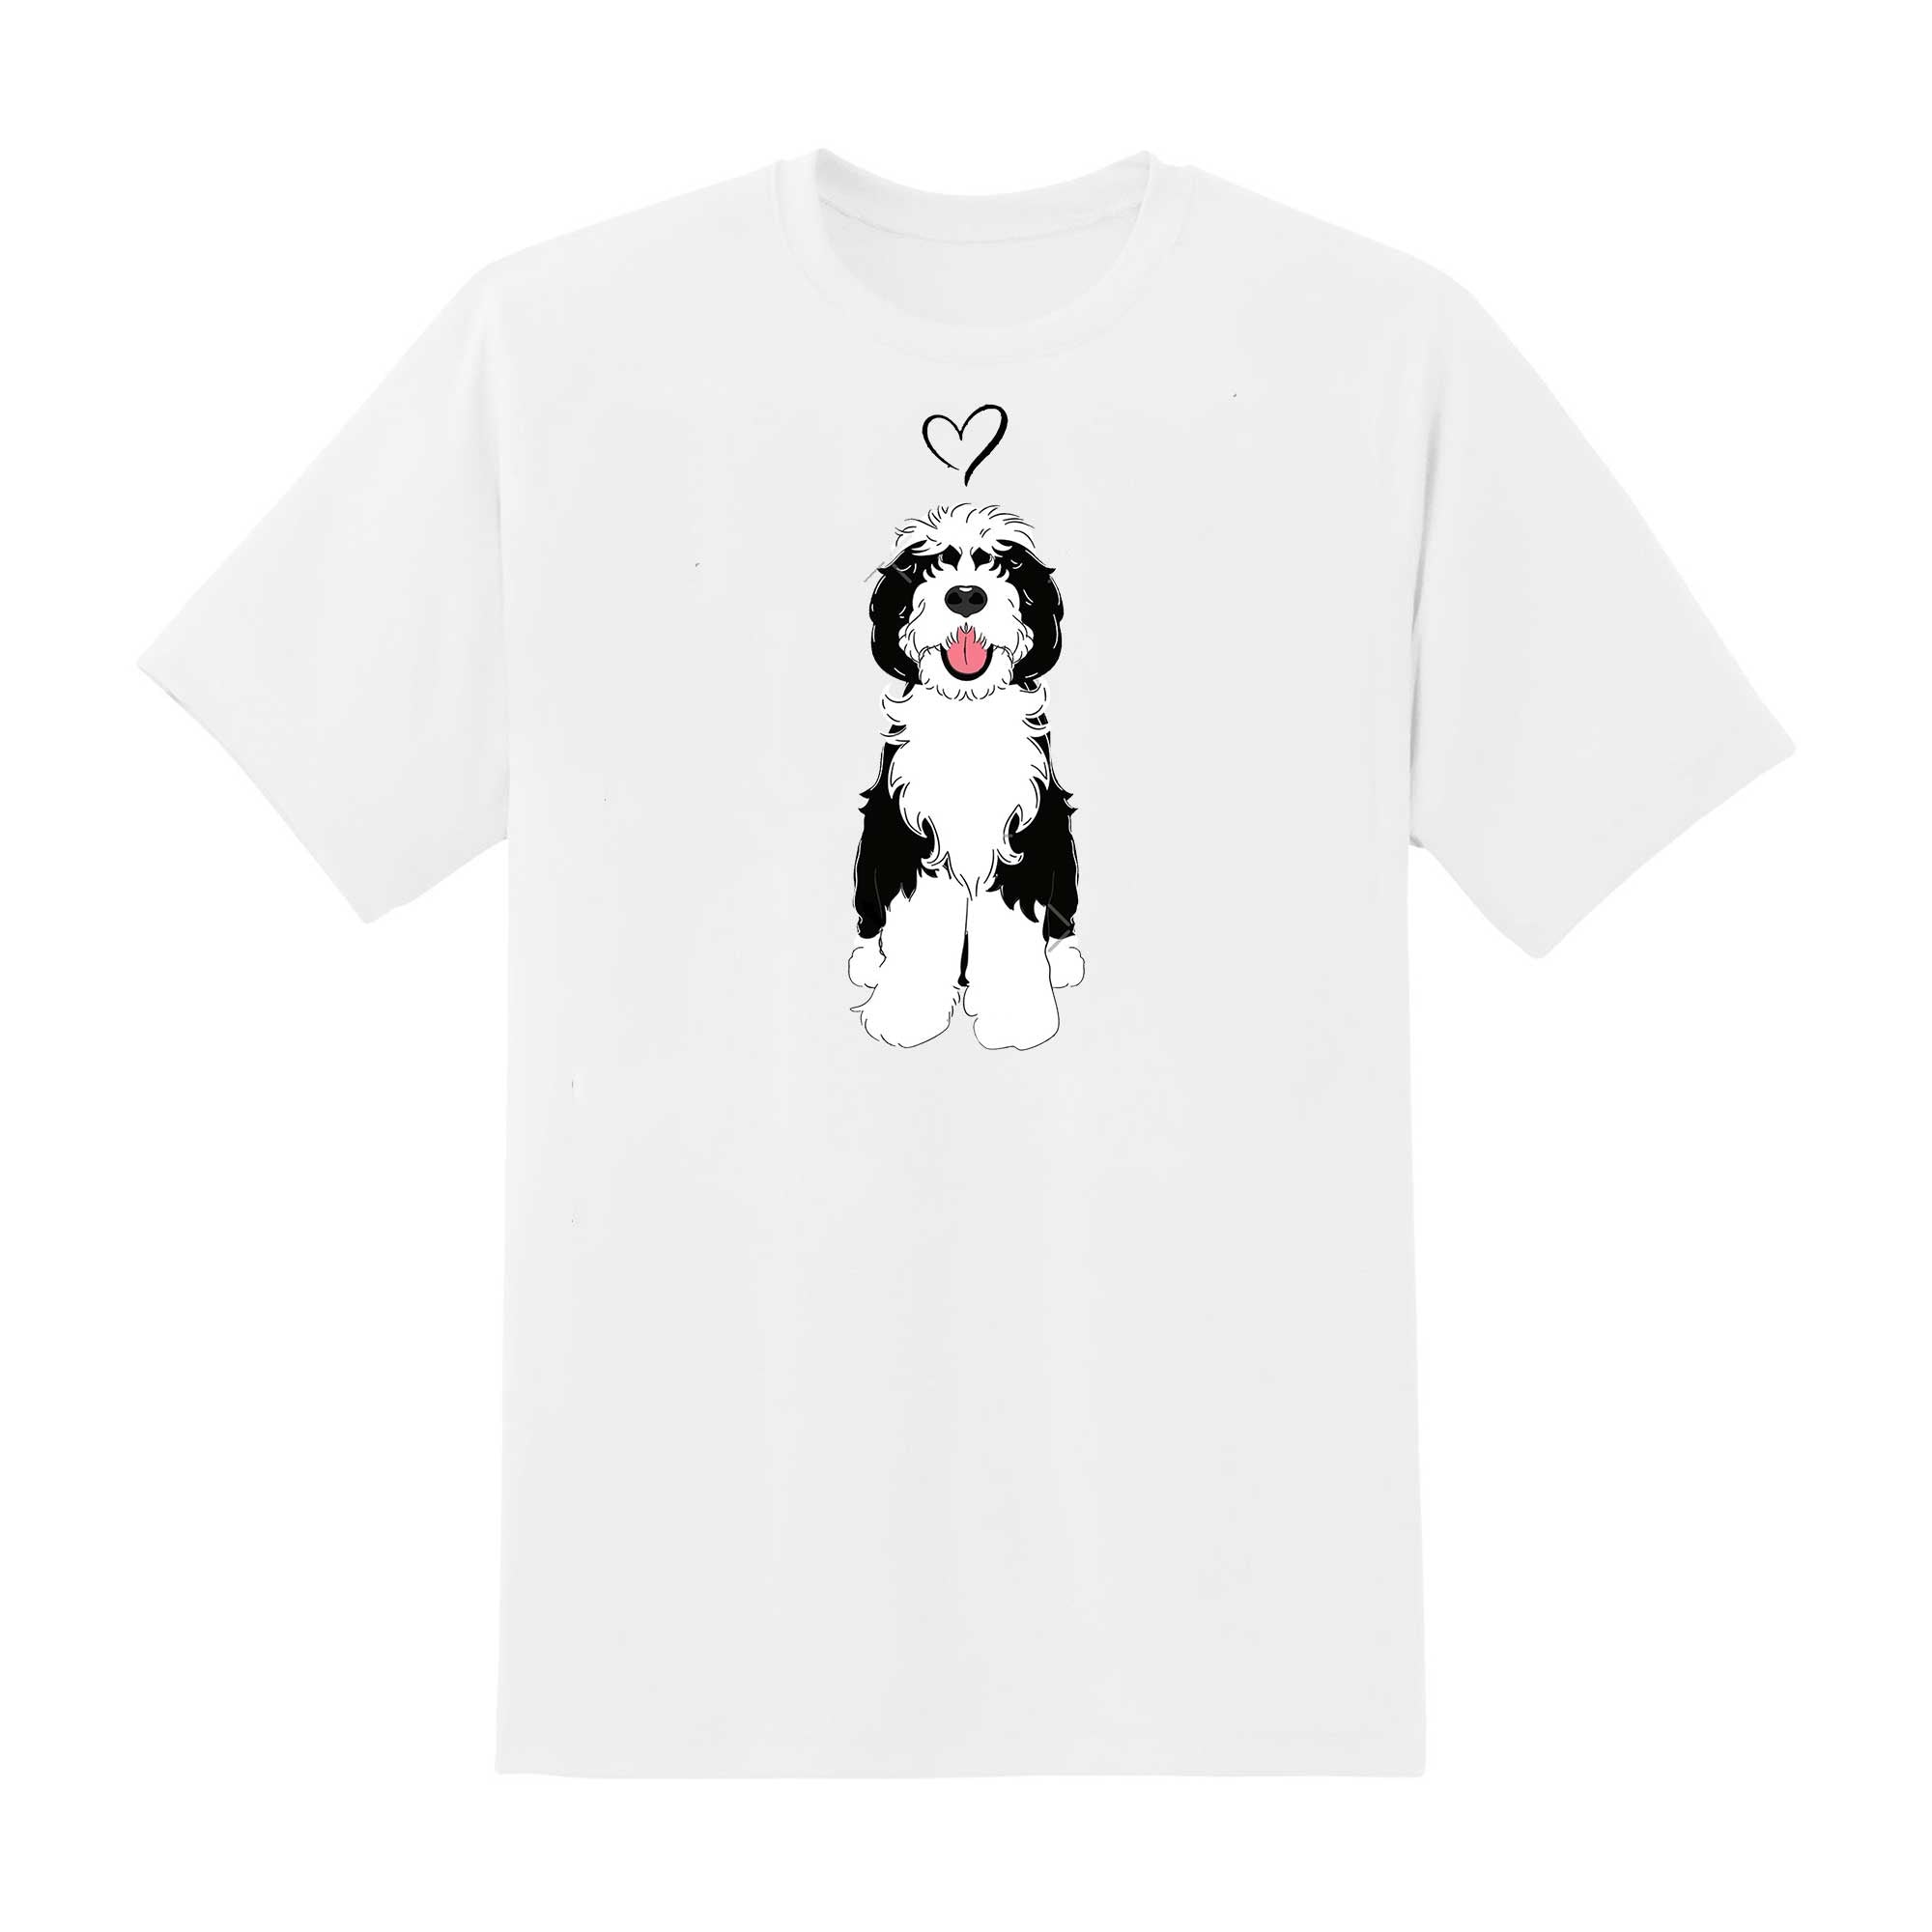 Skitongift Love Black And White Sheepadoodle Classic T Shirt Funny Shirts Hoodie Sweater Short Sleeve Casual Shirt Regular Fit